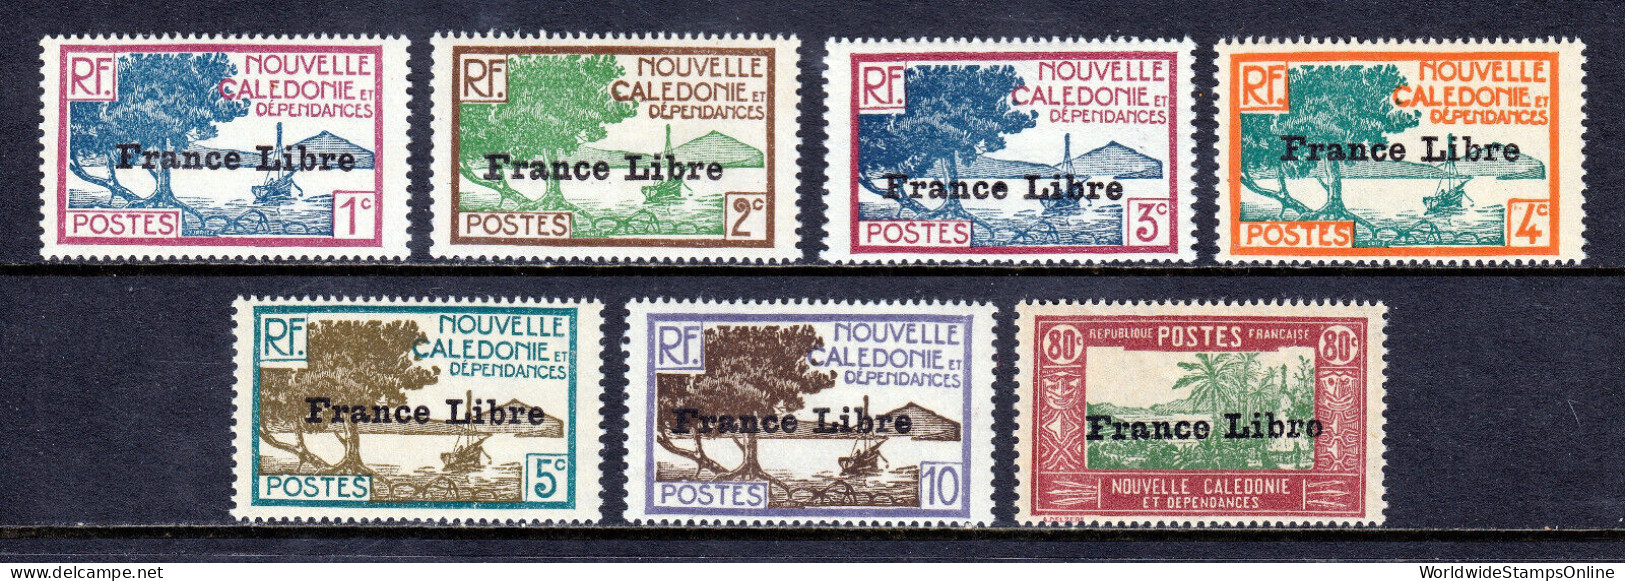 NEW CALEDONIA — SCOTT 217/236  — 1941 FRANCE LIBRE ISSUE — MH — SCV $99 - Unused Stamps